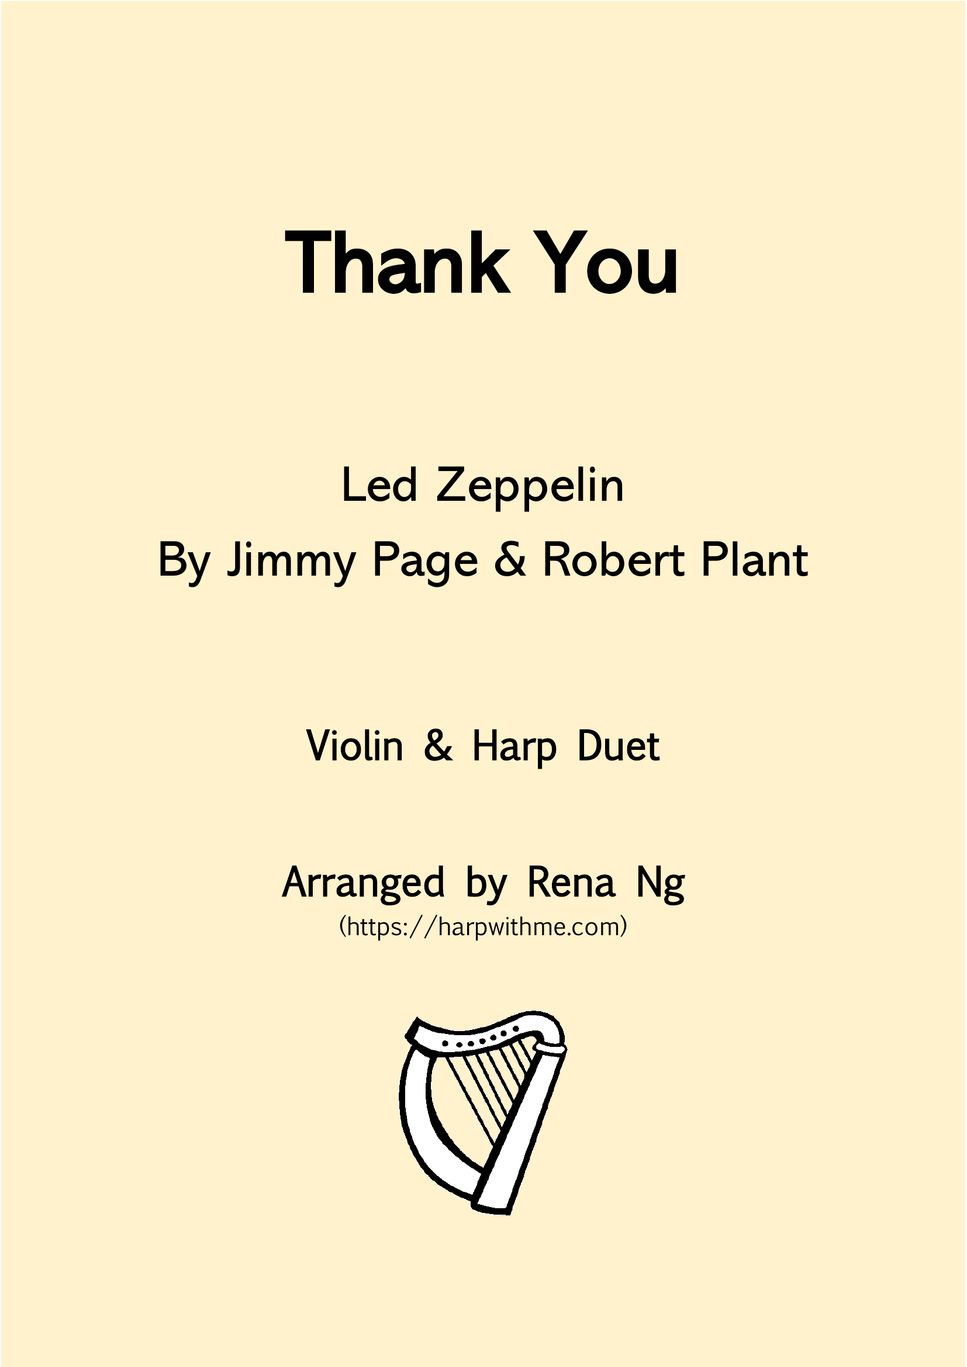 Led Zeppelin - Thank You (Violin & Harp) - Intermediate by Harp With Me